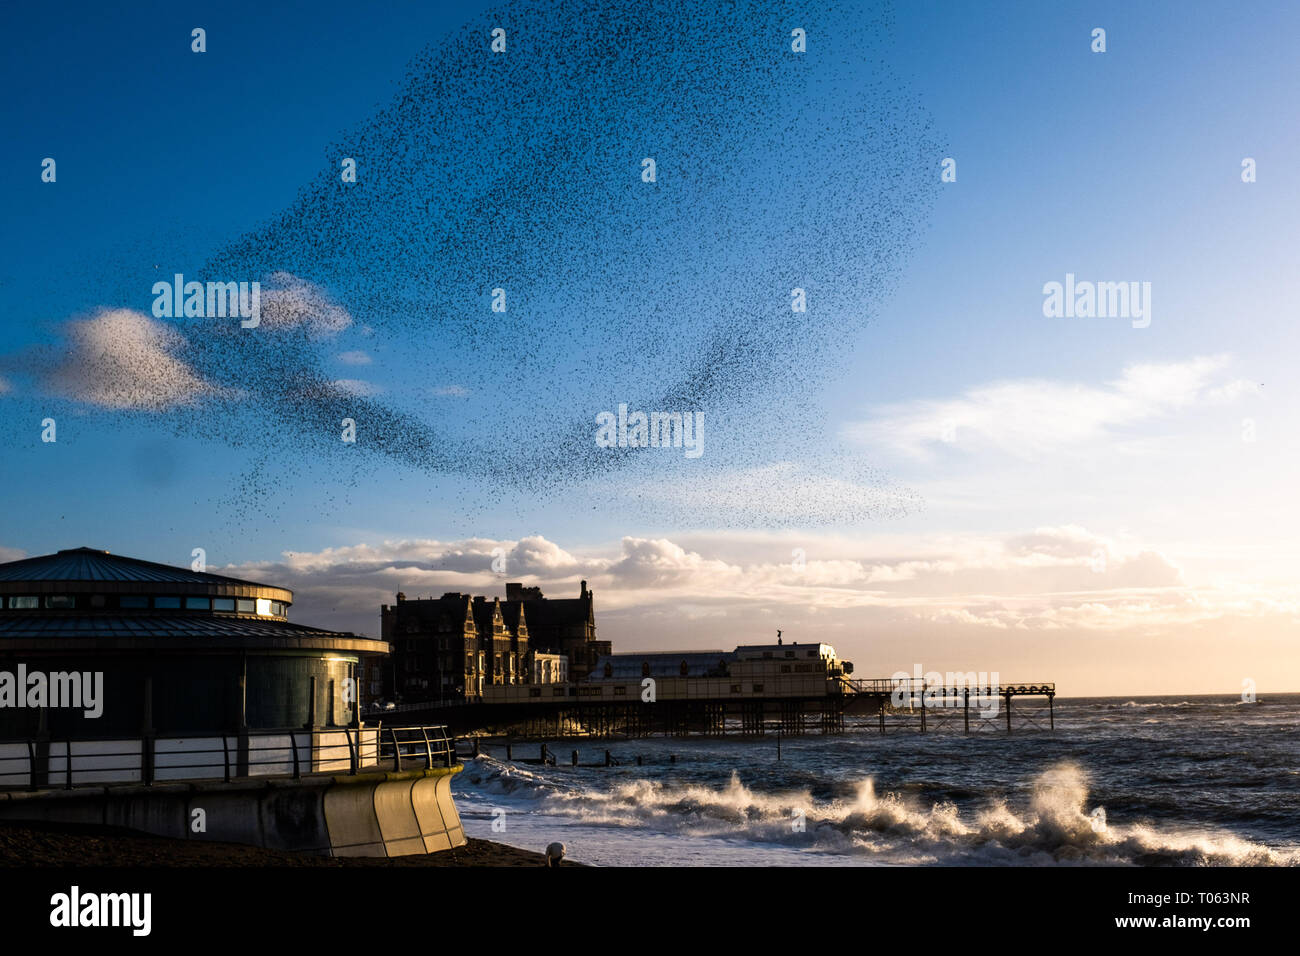 Aberystwyth, UK. 17th Mar, 2019. Tens of thousands of starlings perform their nightly balletic murmurations in the sky above Aberystwyth as the day draws to an end. The migratory birds are coming to the end of their winter sojourn and will soon fly off to return to their breeding grounds in Scandinavia for the summer. Aberystwythis one of the few urban roosts in the country and draws people from all over the UK to witness the spectacular nightly displays between October and March.   Credit: keith morris/Alamy Live News Stock Photo